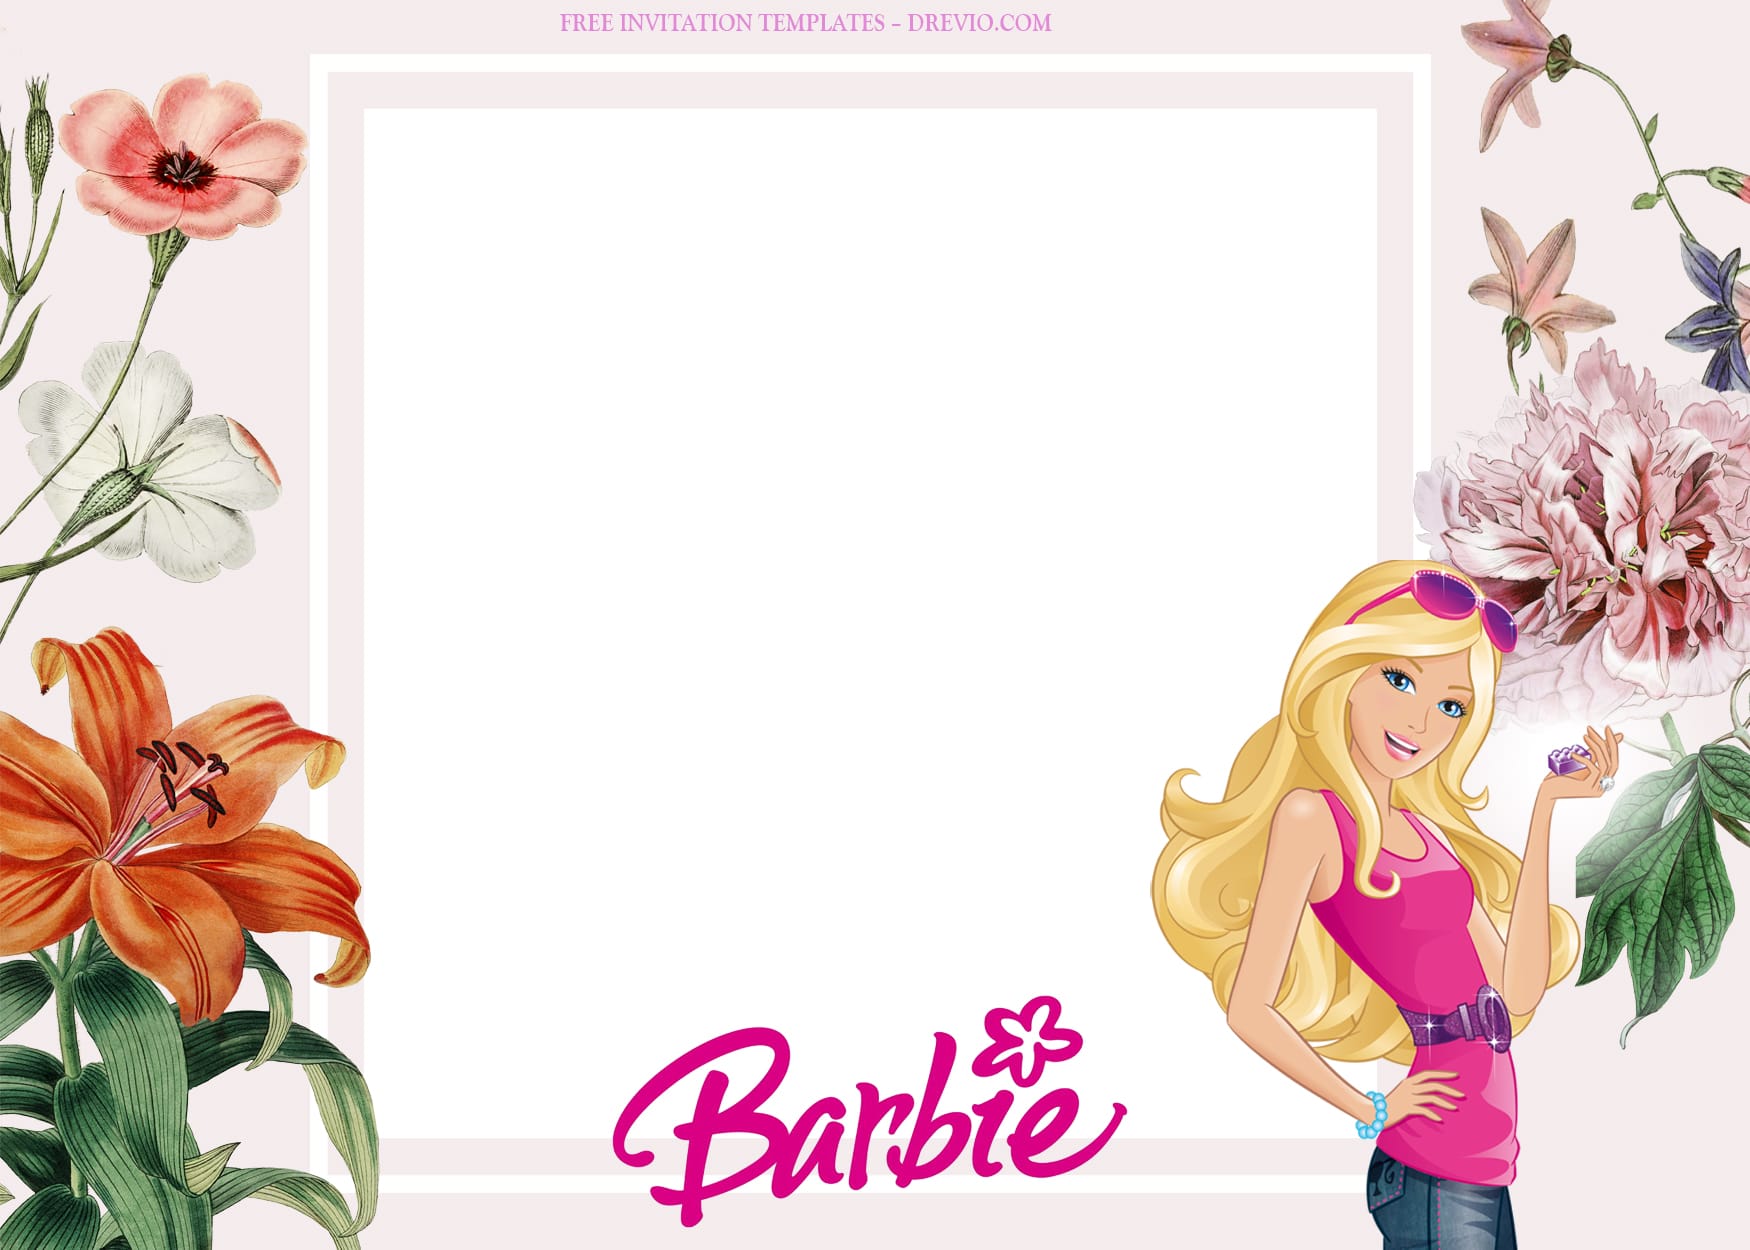 8+ A Good Day With Barbie Birthday Invitation Templates Type Two